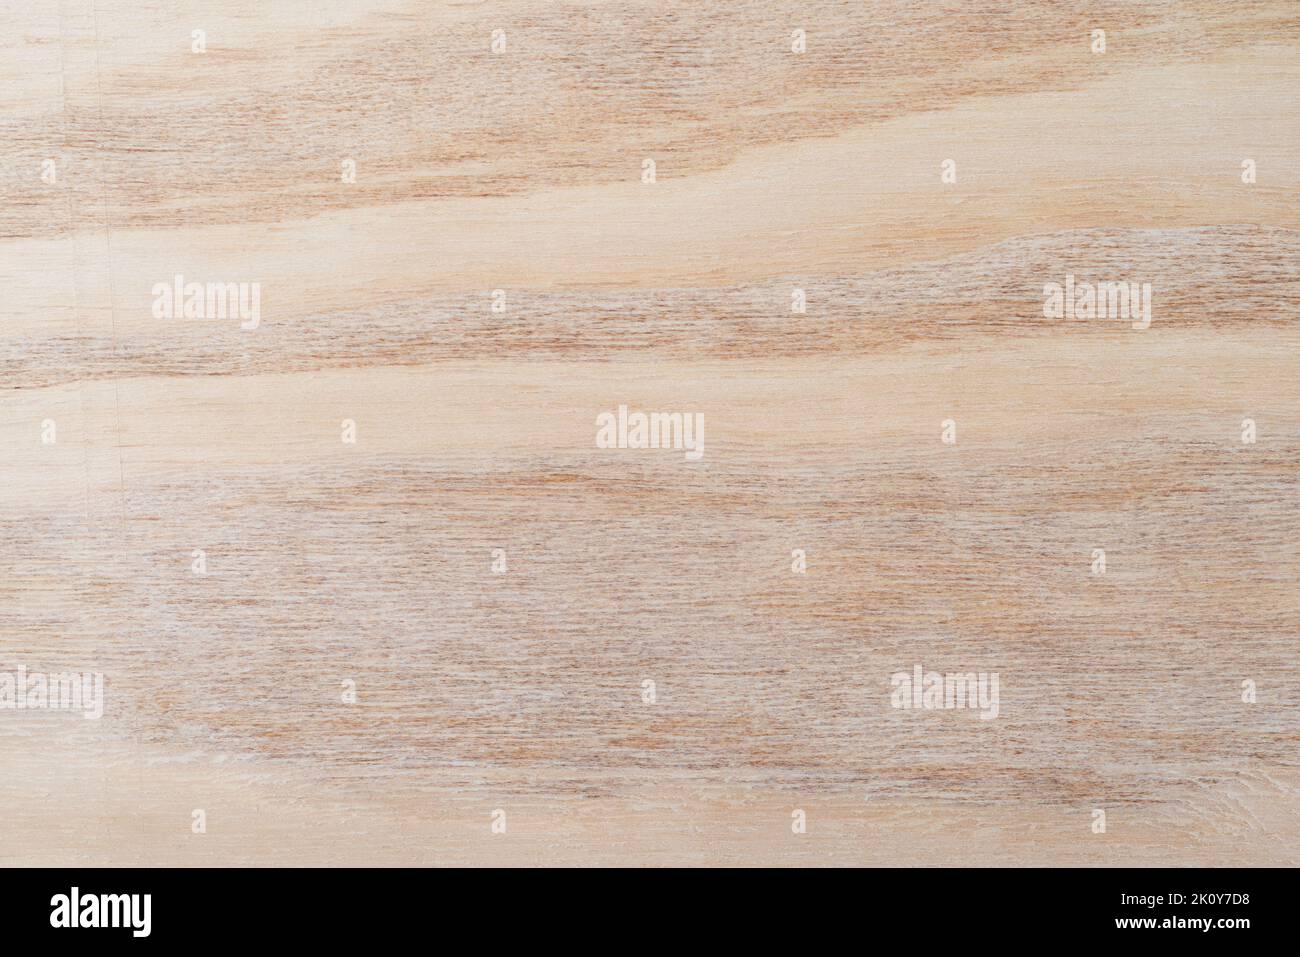 Very close view of a sanded plywood surface in natural light. Stock Photo